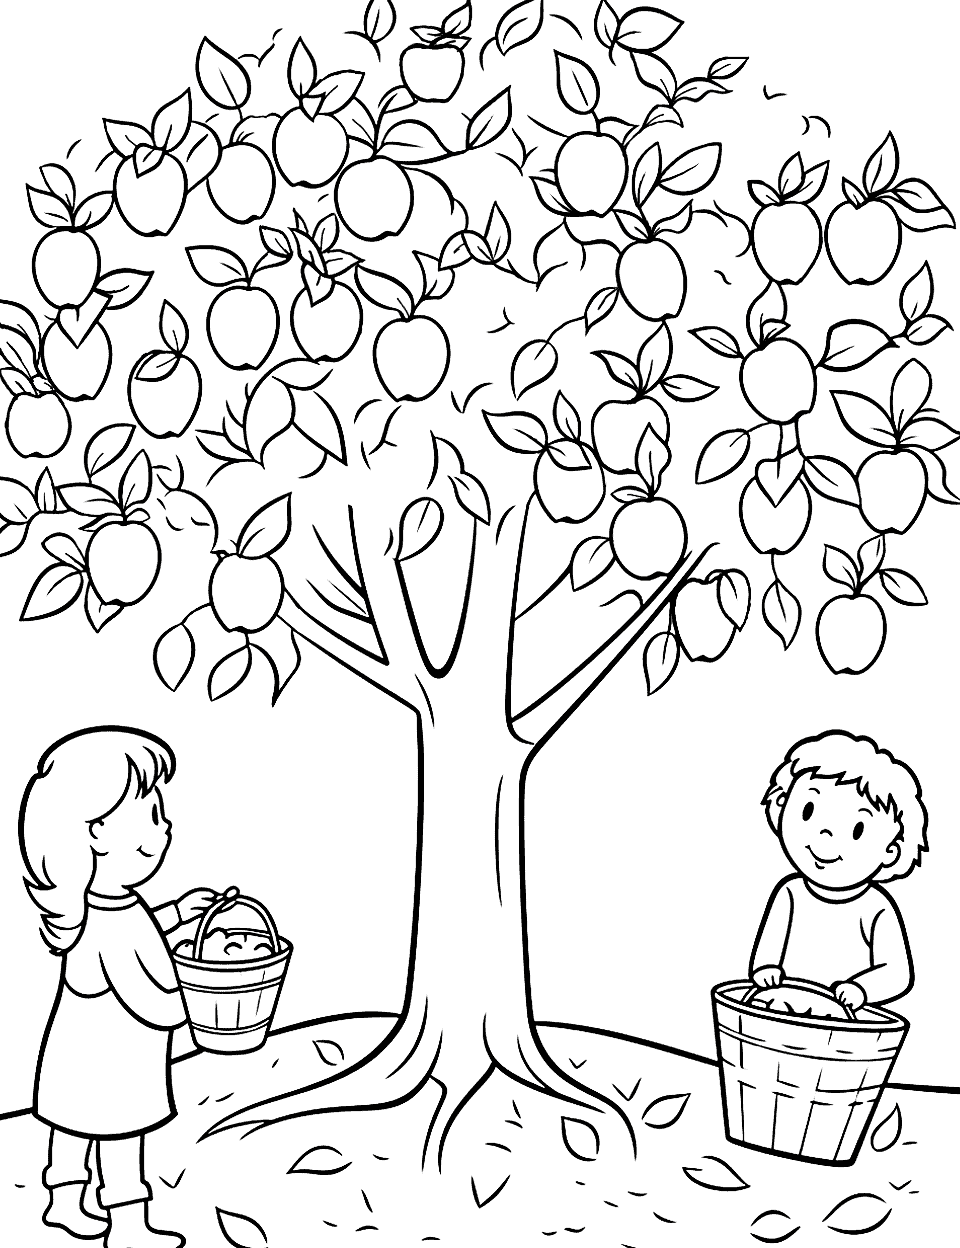 Apple Harvest Fall Coloring Page - A coloring page featuring children collecting apples in the autumn, with an apple tree full of fruit.